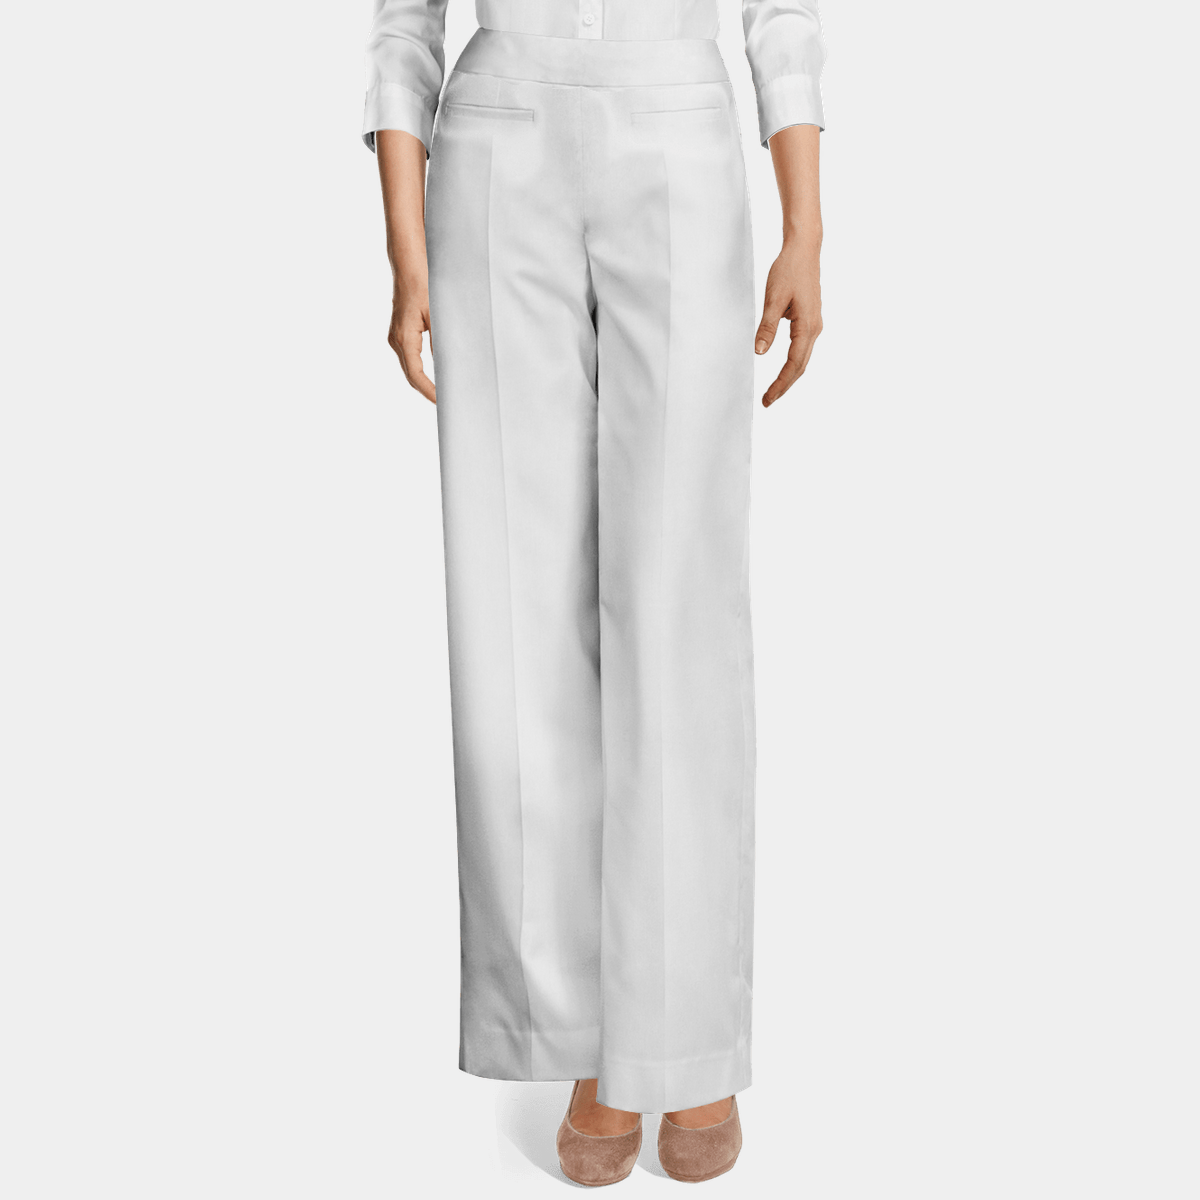 Caracilia Women's Wide Leg Linen Palazzo Pants High Waisted Business Casual  Trousers Loose Pleated Dressy Pants with Pocket White X-Large